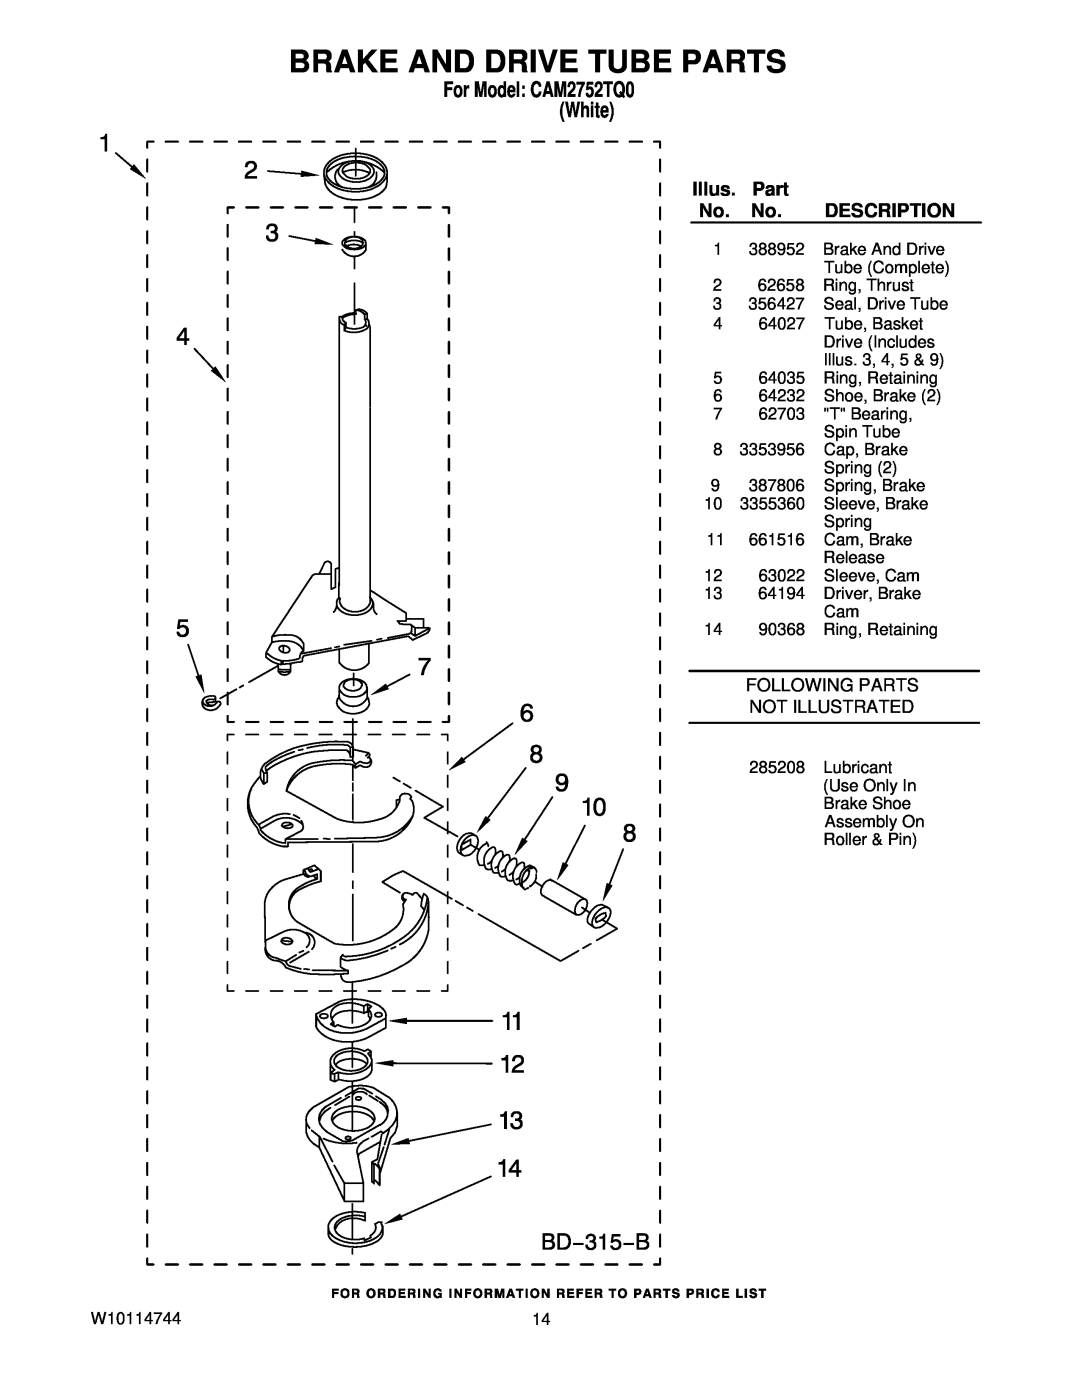 Whirlpool CAM2752TQ0 manual Brake And Drive Tube Parts, Description, Following Parts Not Illustrated 